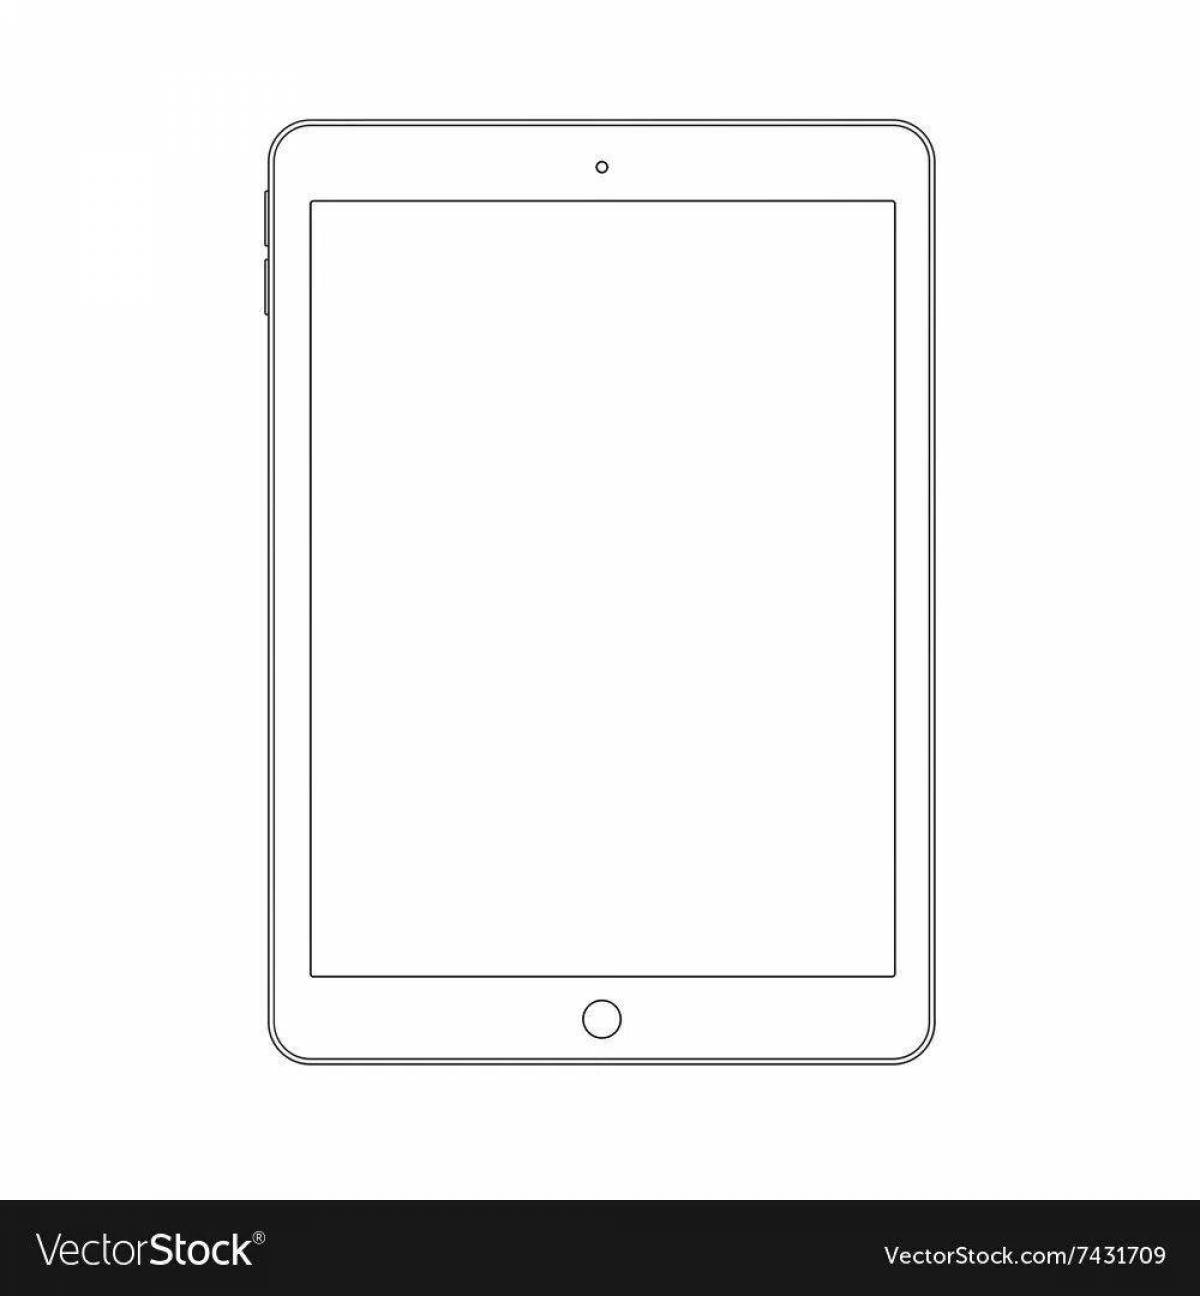 Exciting phone and tablet coloring pages